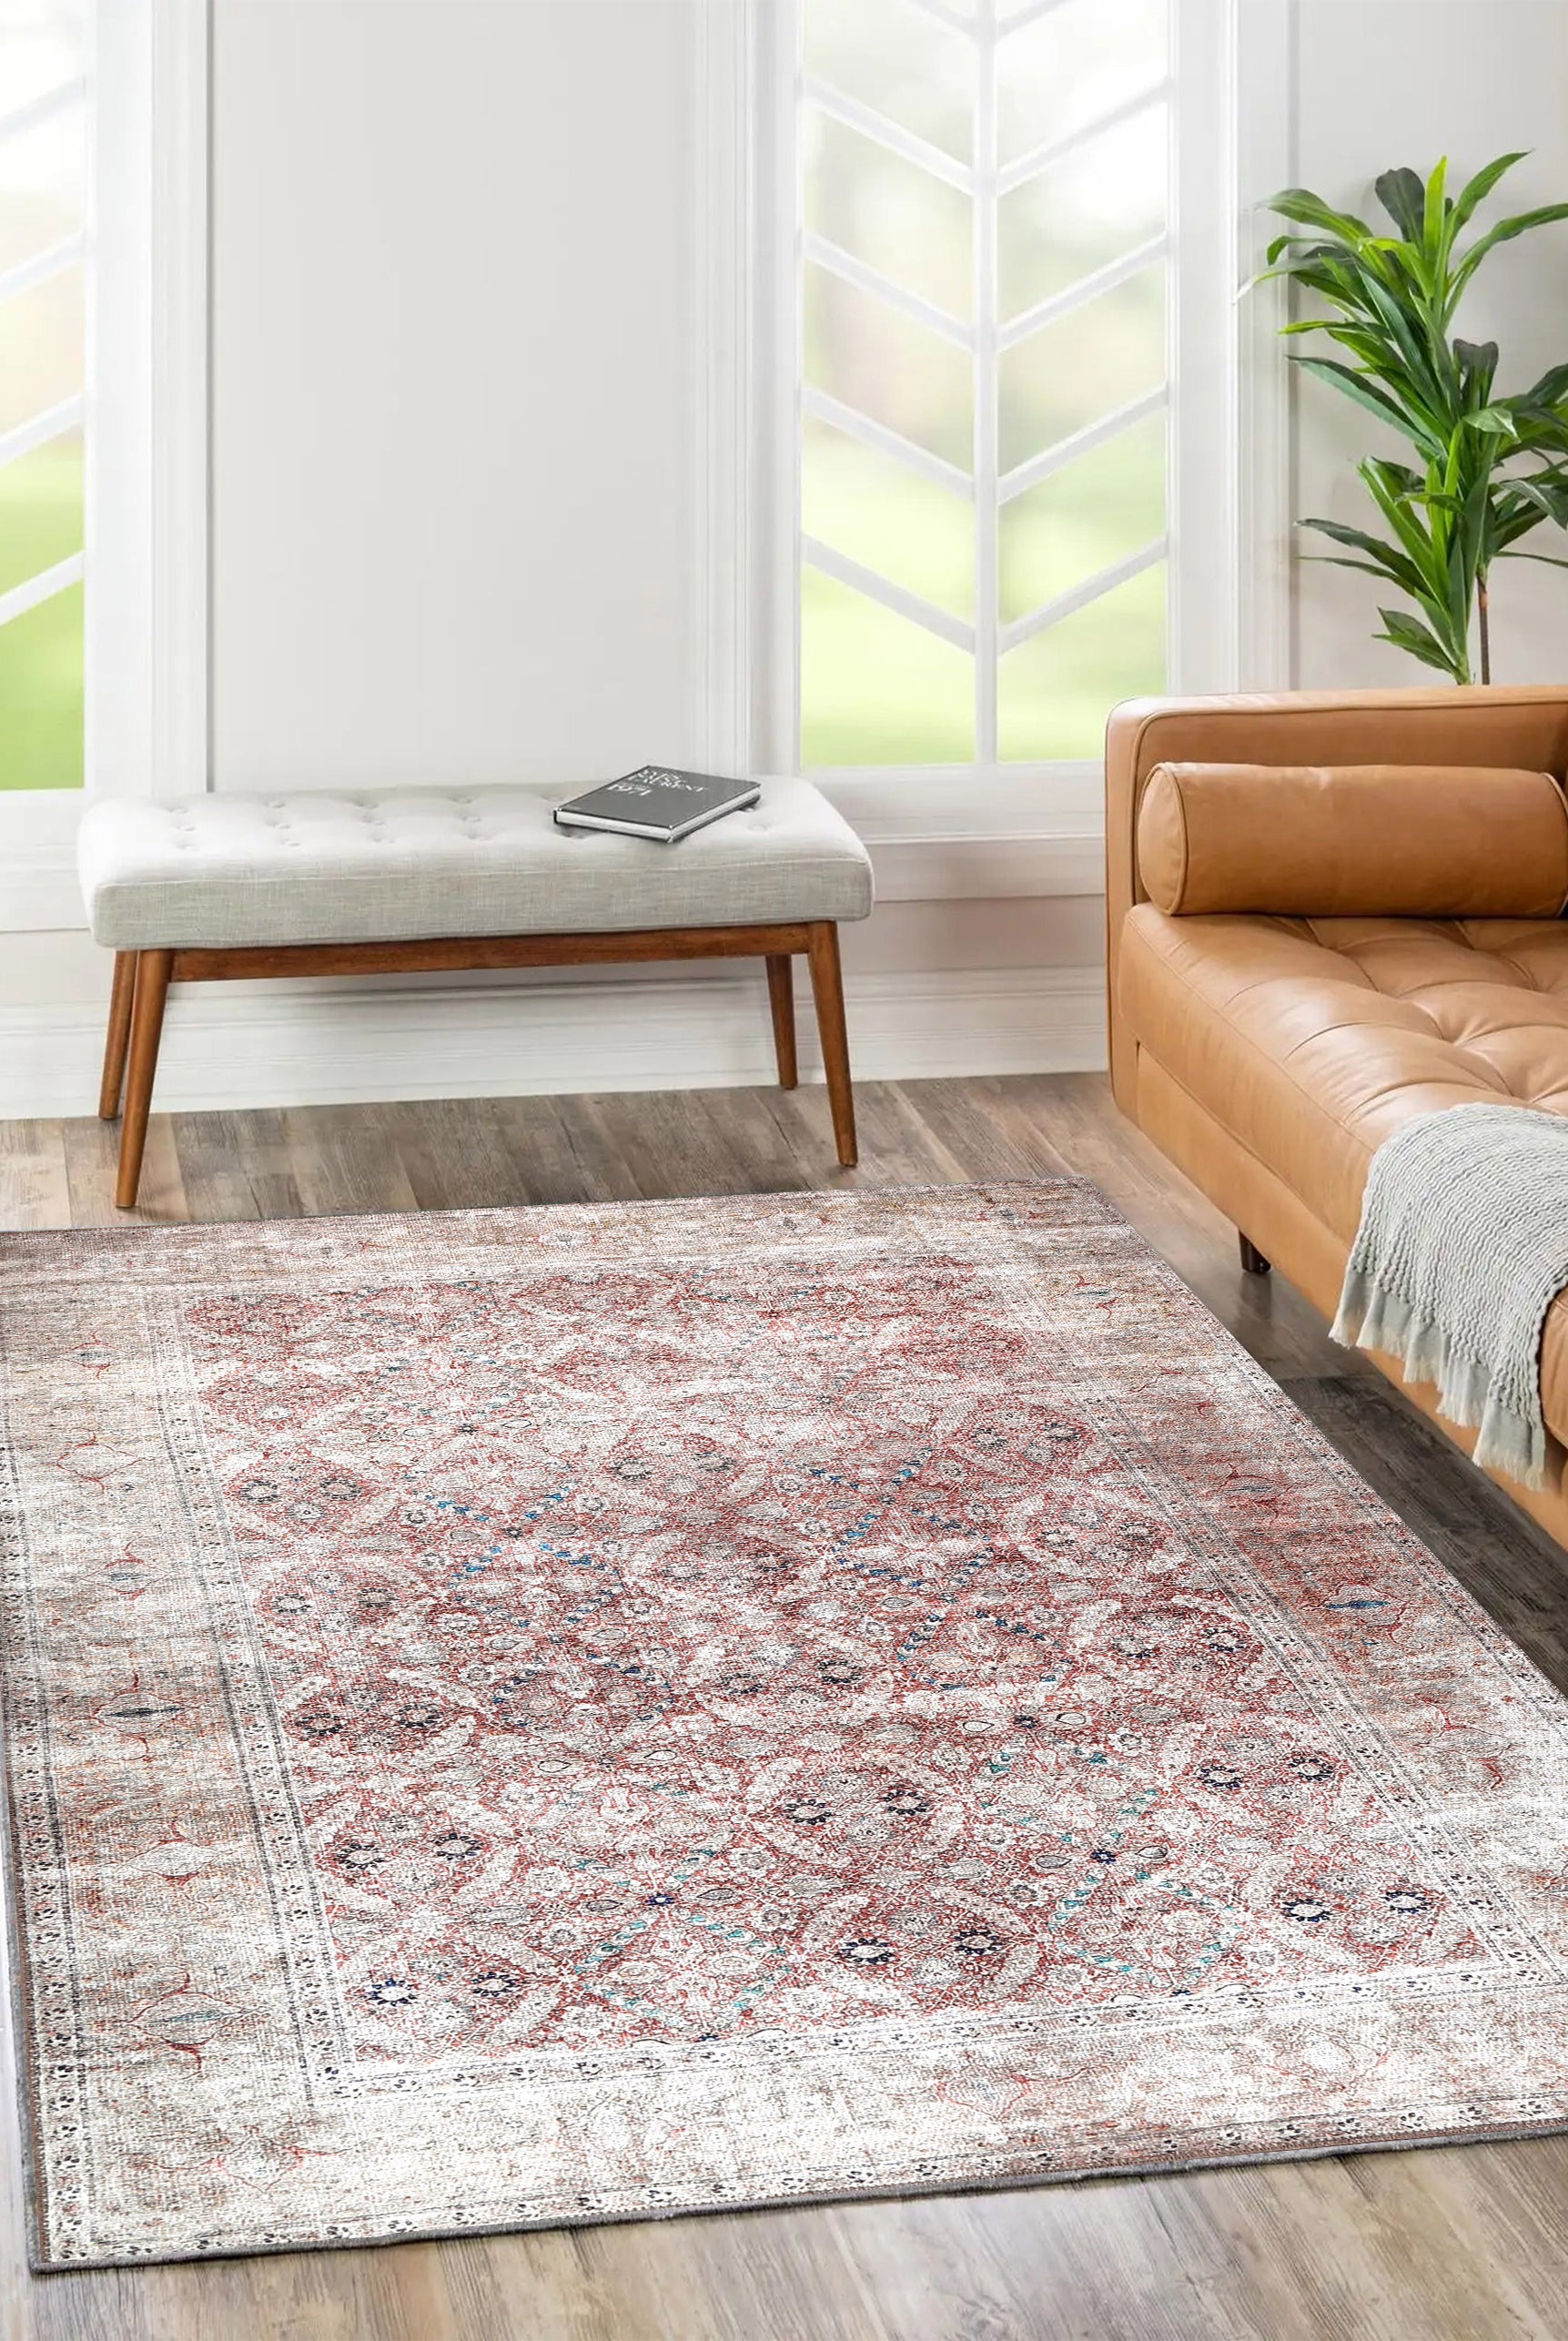 Distressed Vintage Levent Area Rug in living room